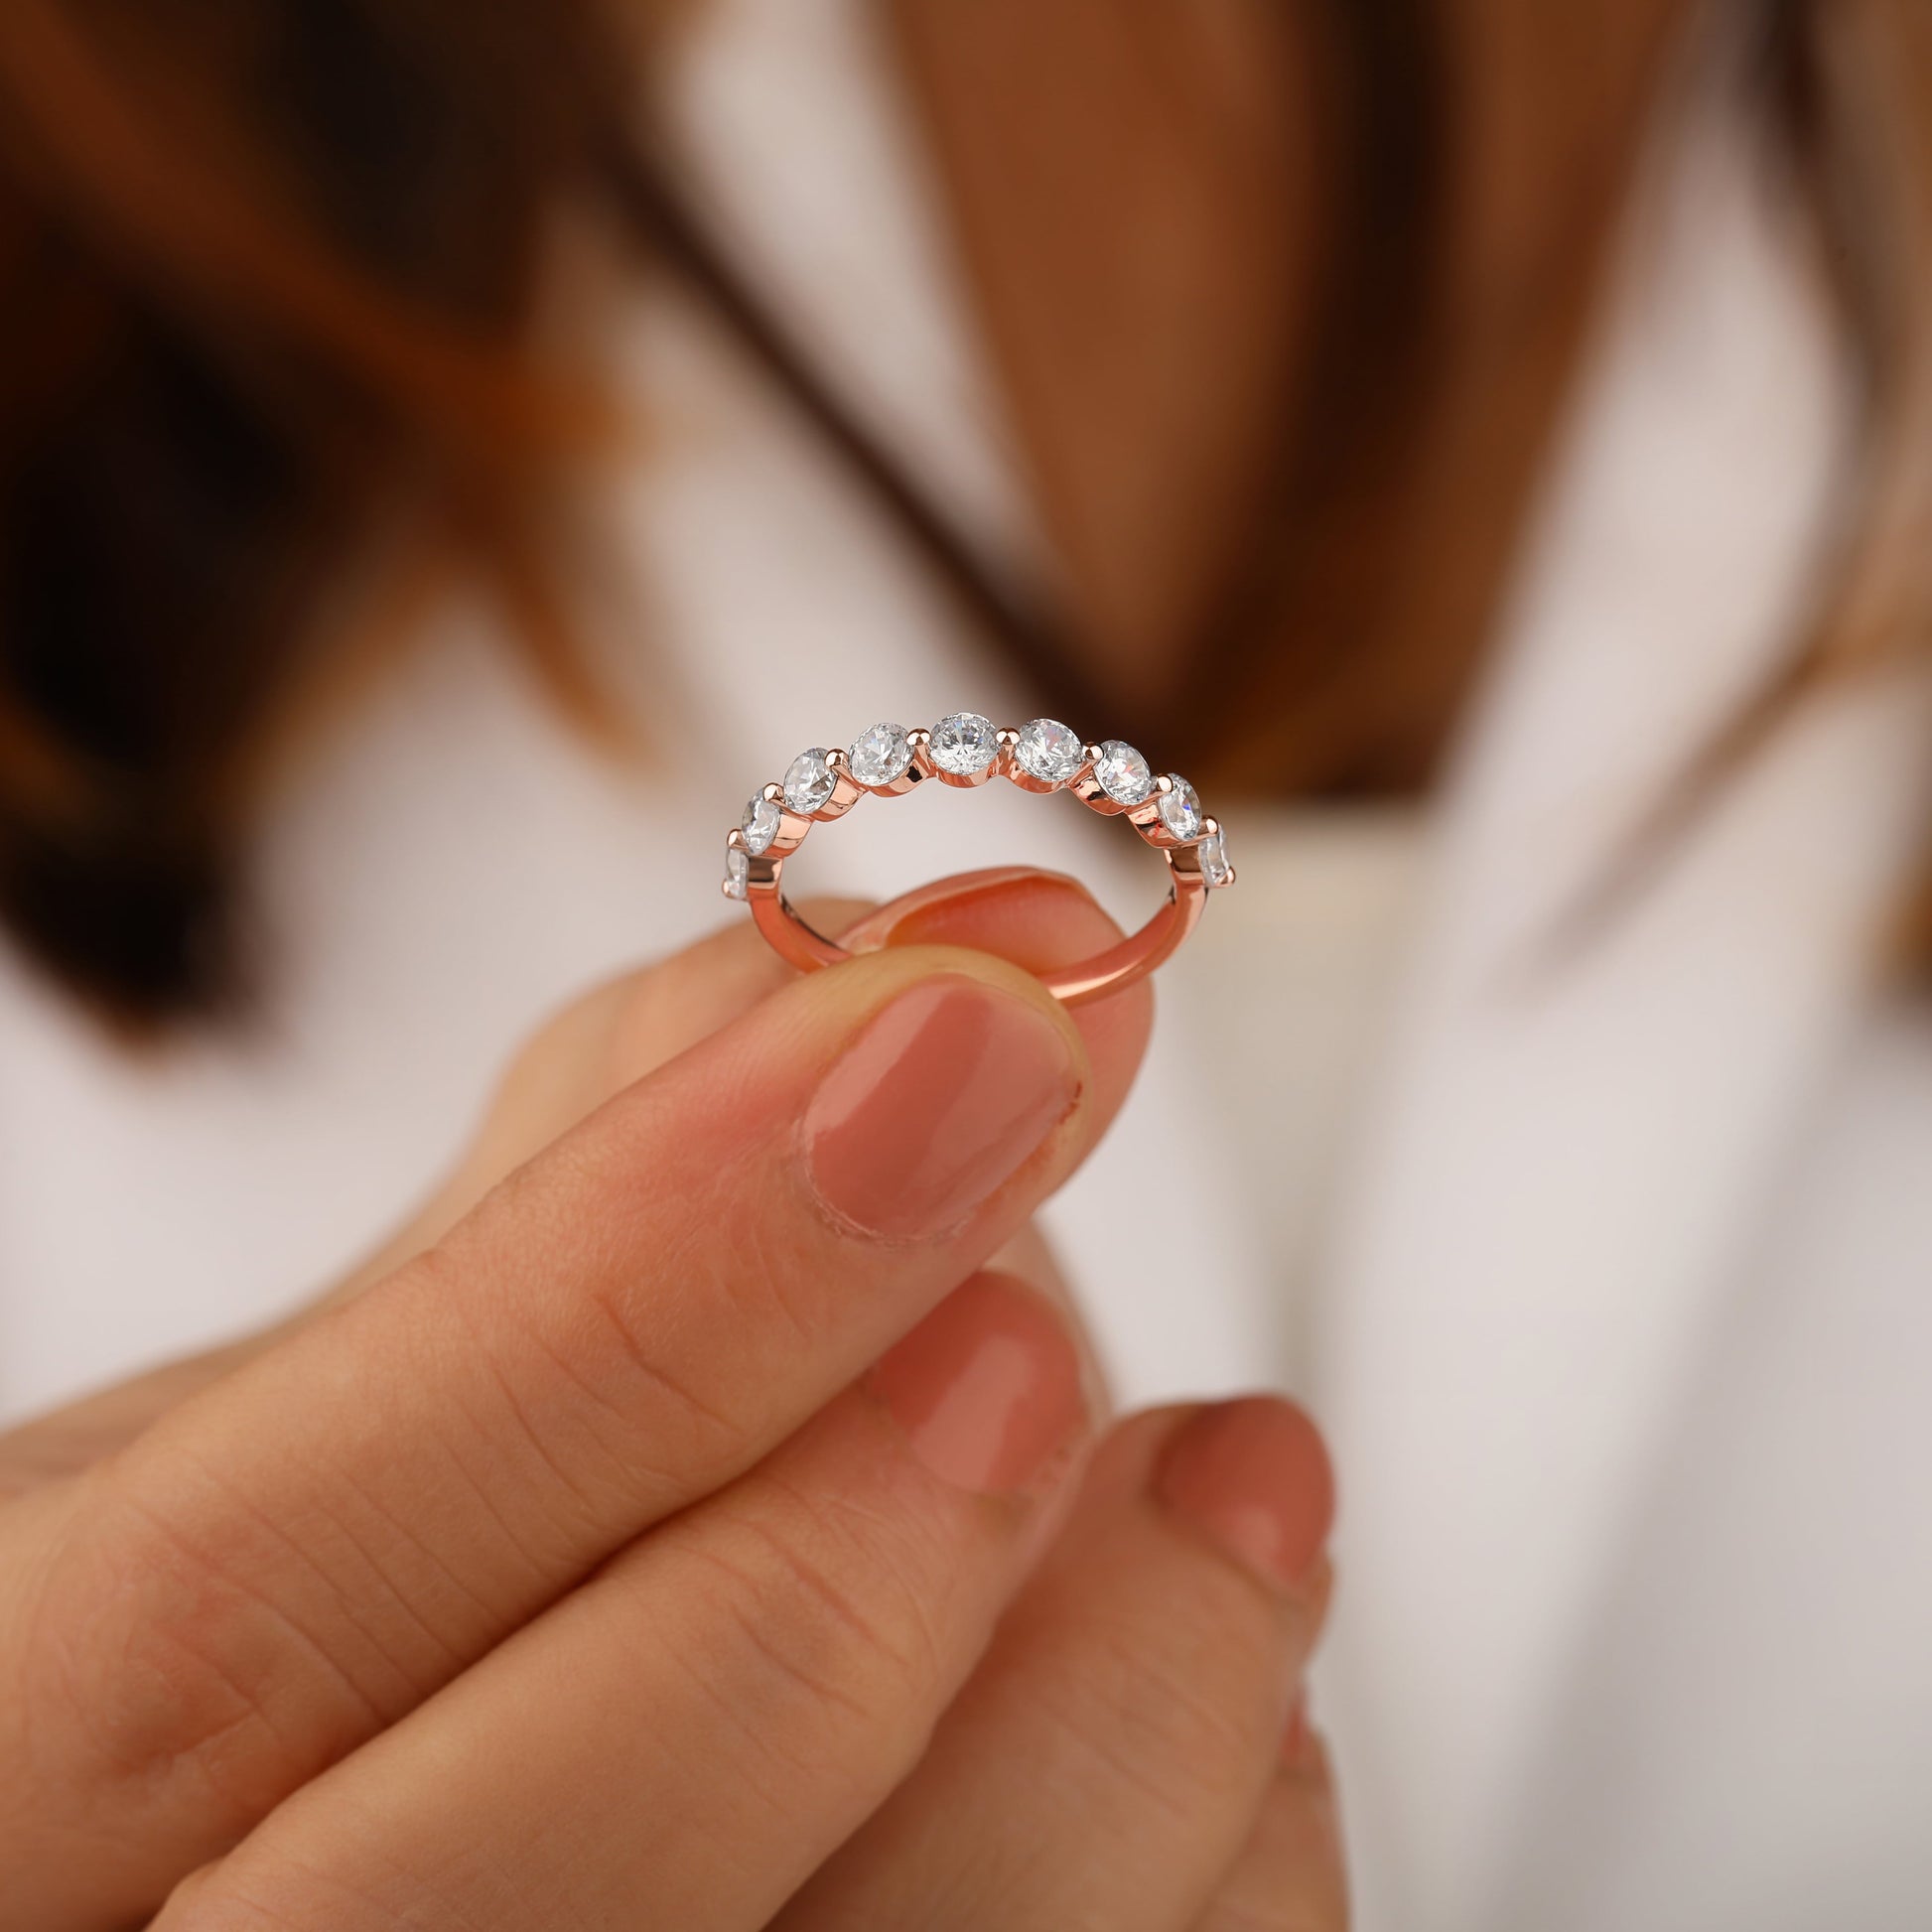 A person holding half wedding band